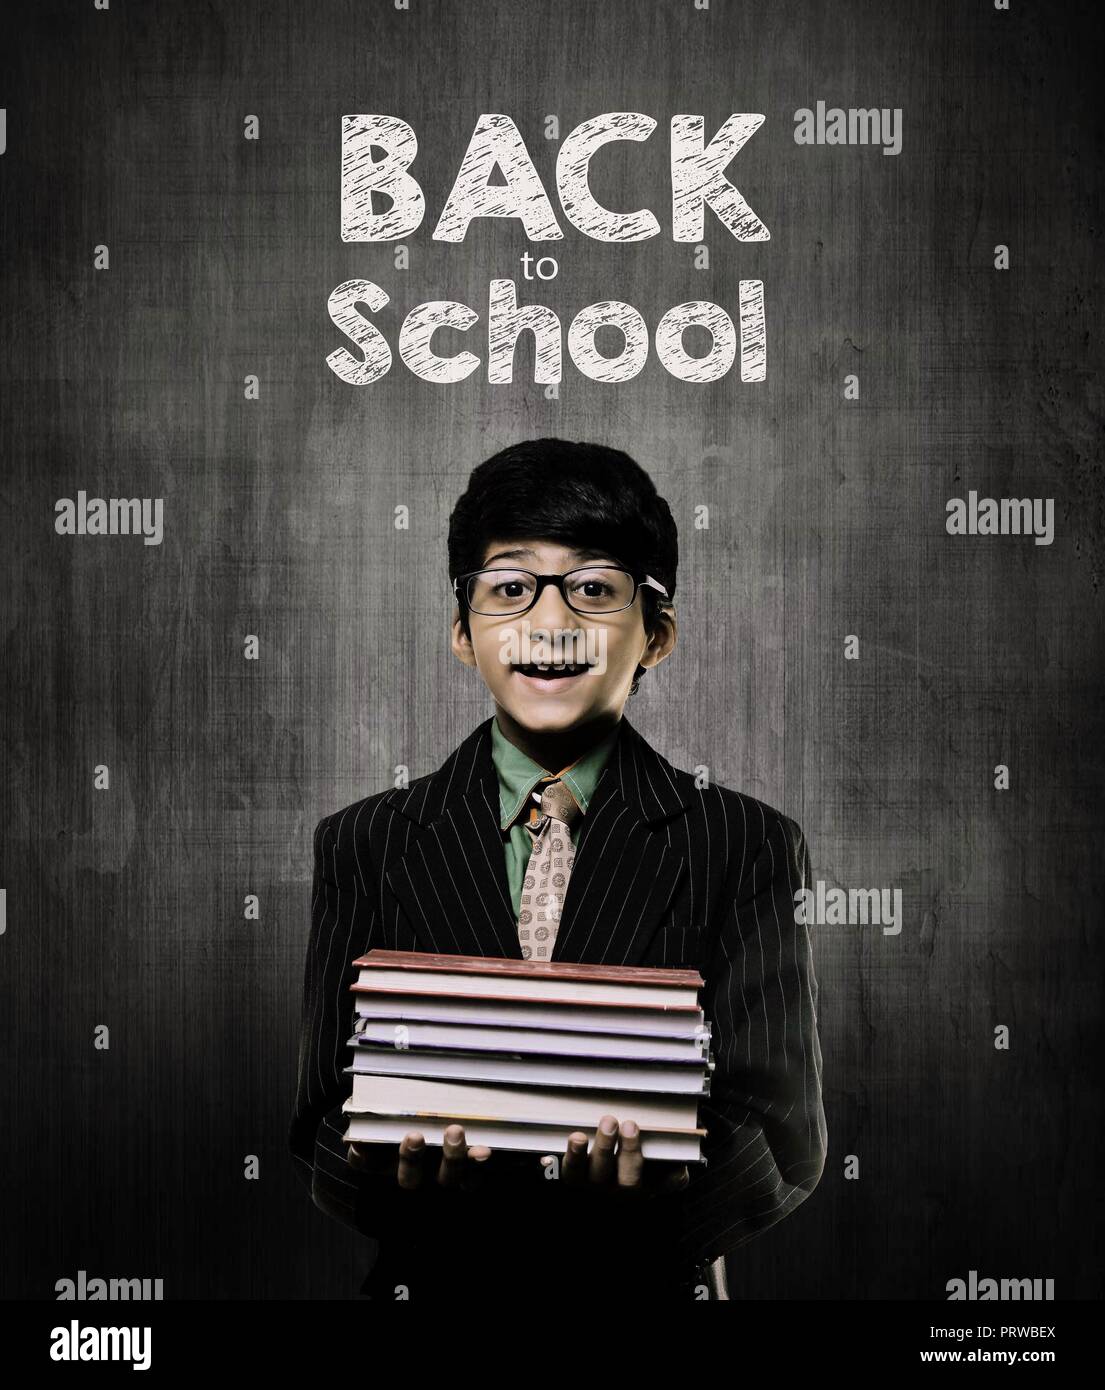 Cute Intelligent Little Boy Holding Books And Wearing Glasses, Smiling While Standing Before A Chalkboard, Back To School Written On Board Stock Photo